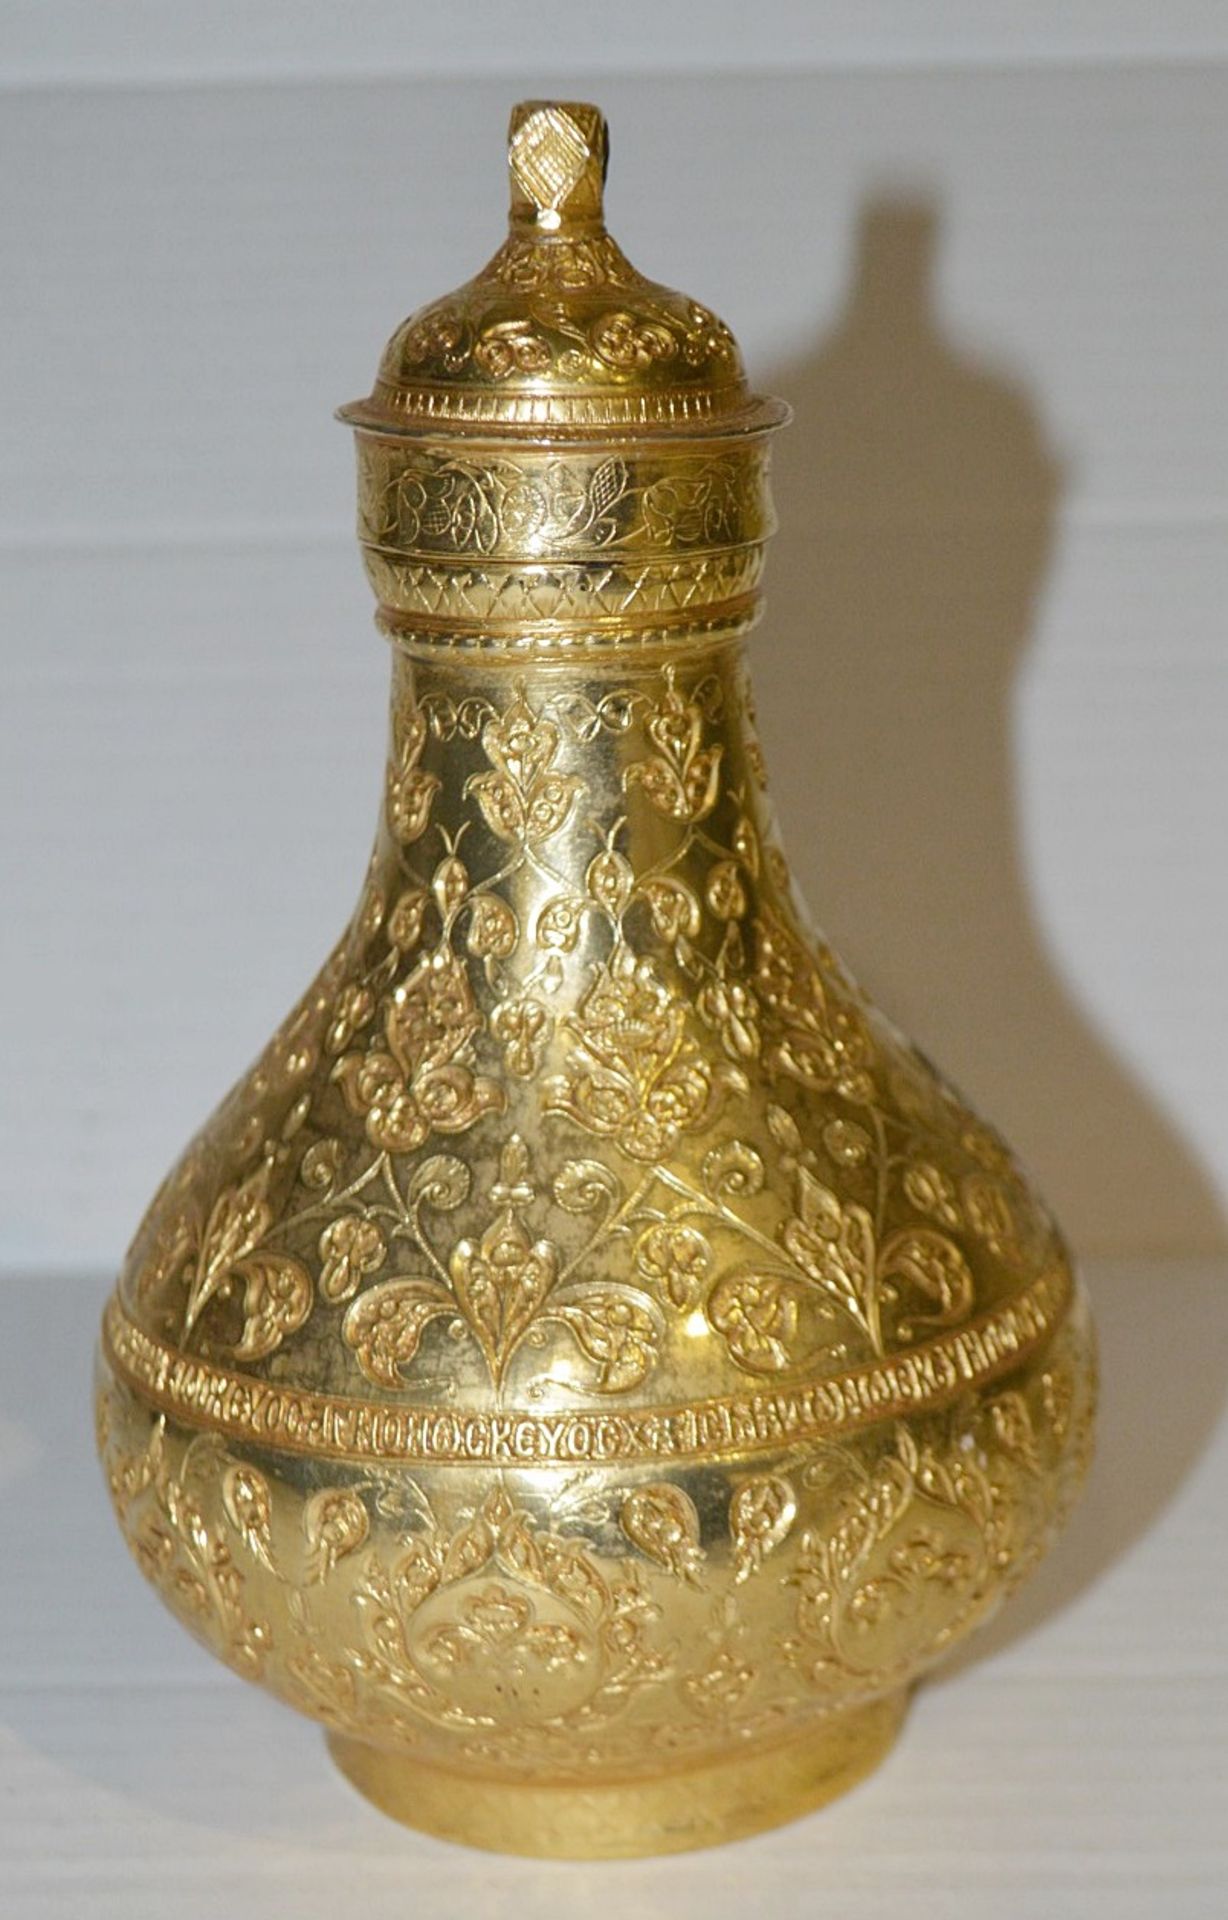 1 x Byzantine Holy Oil Flask - Benaki Museum Replica In Gilt Metal - Hand Engraved Details On The - Image 4 of 6